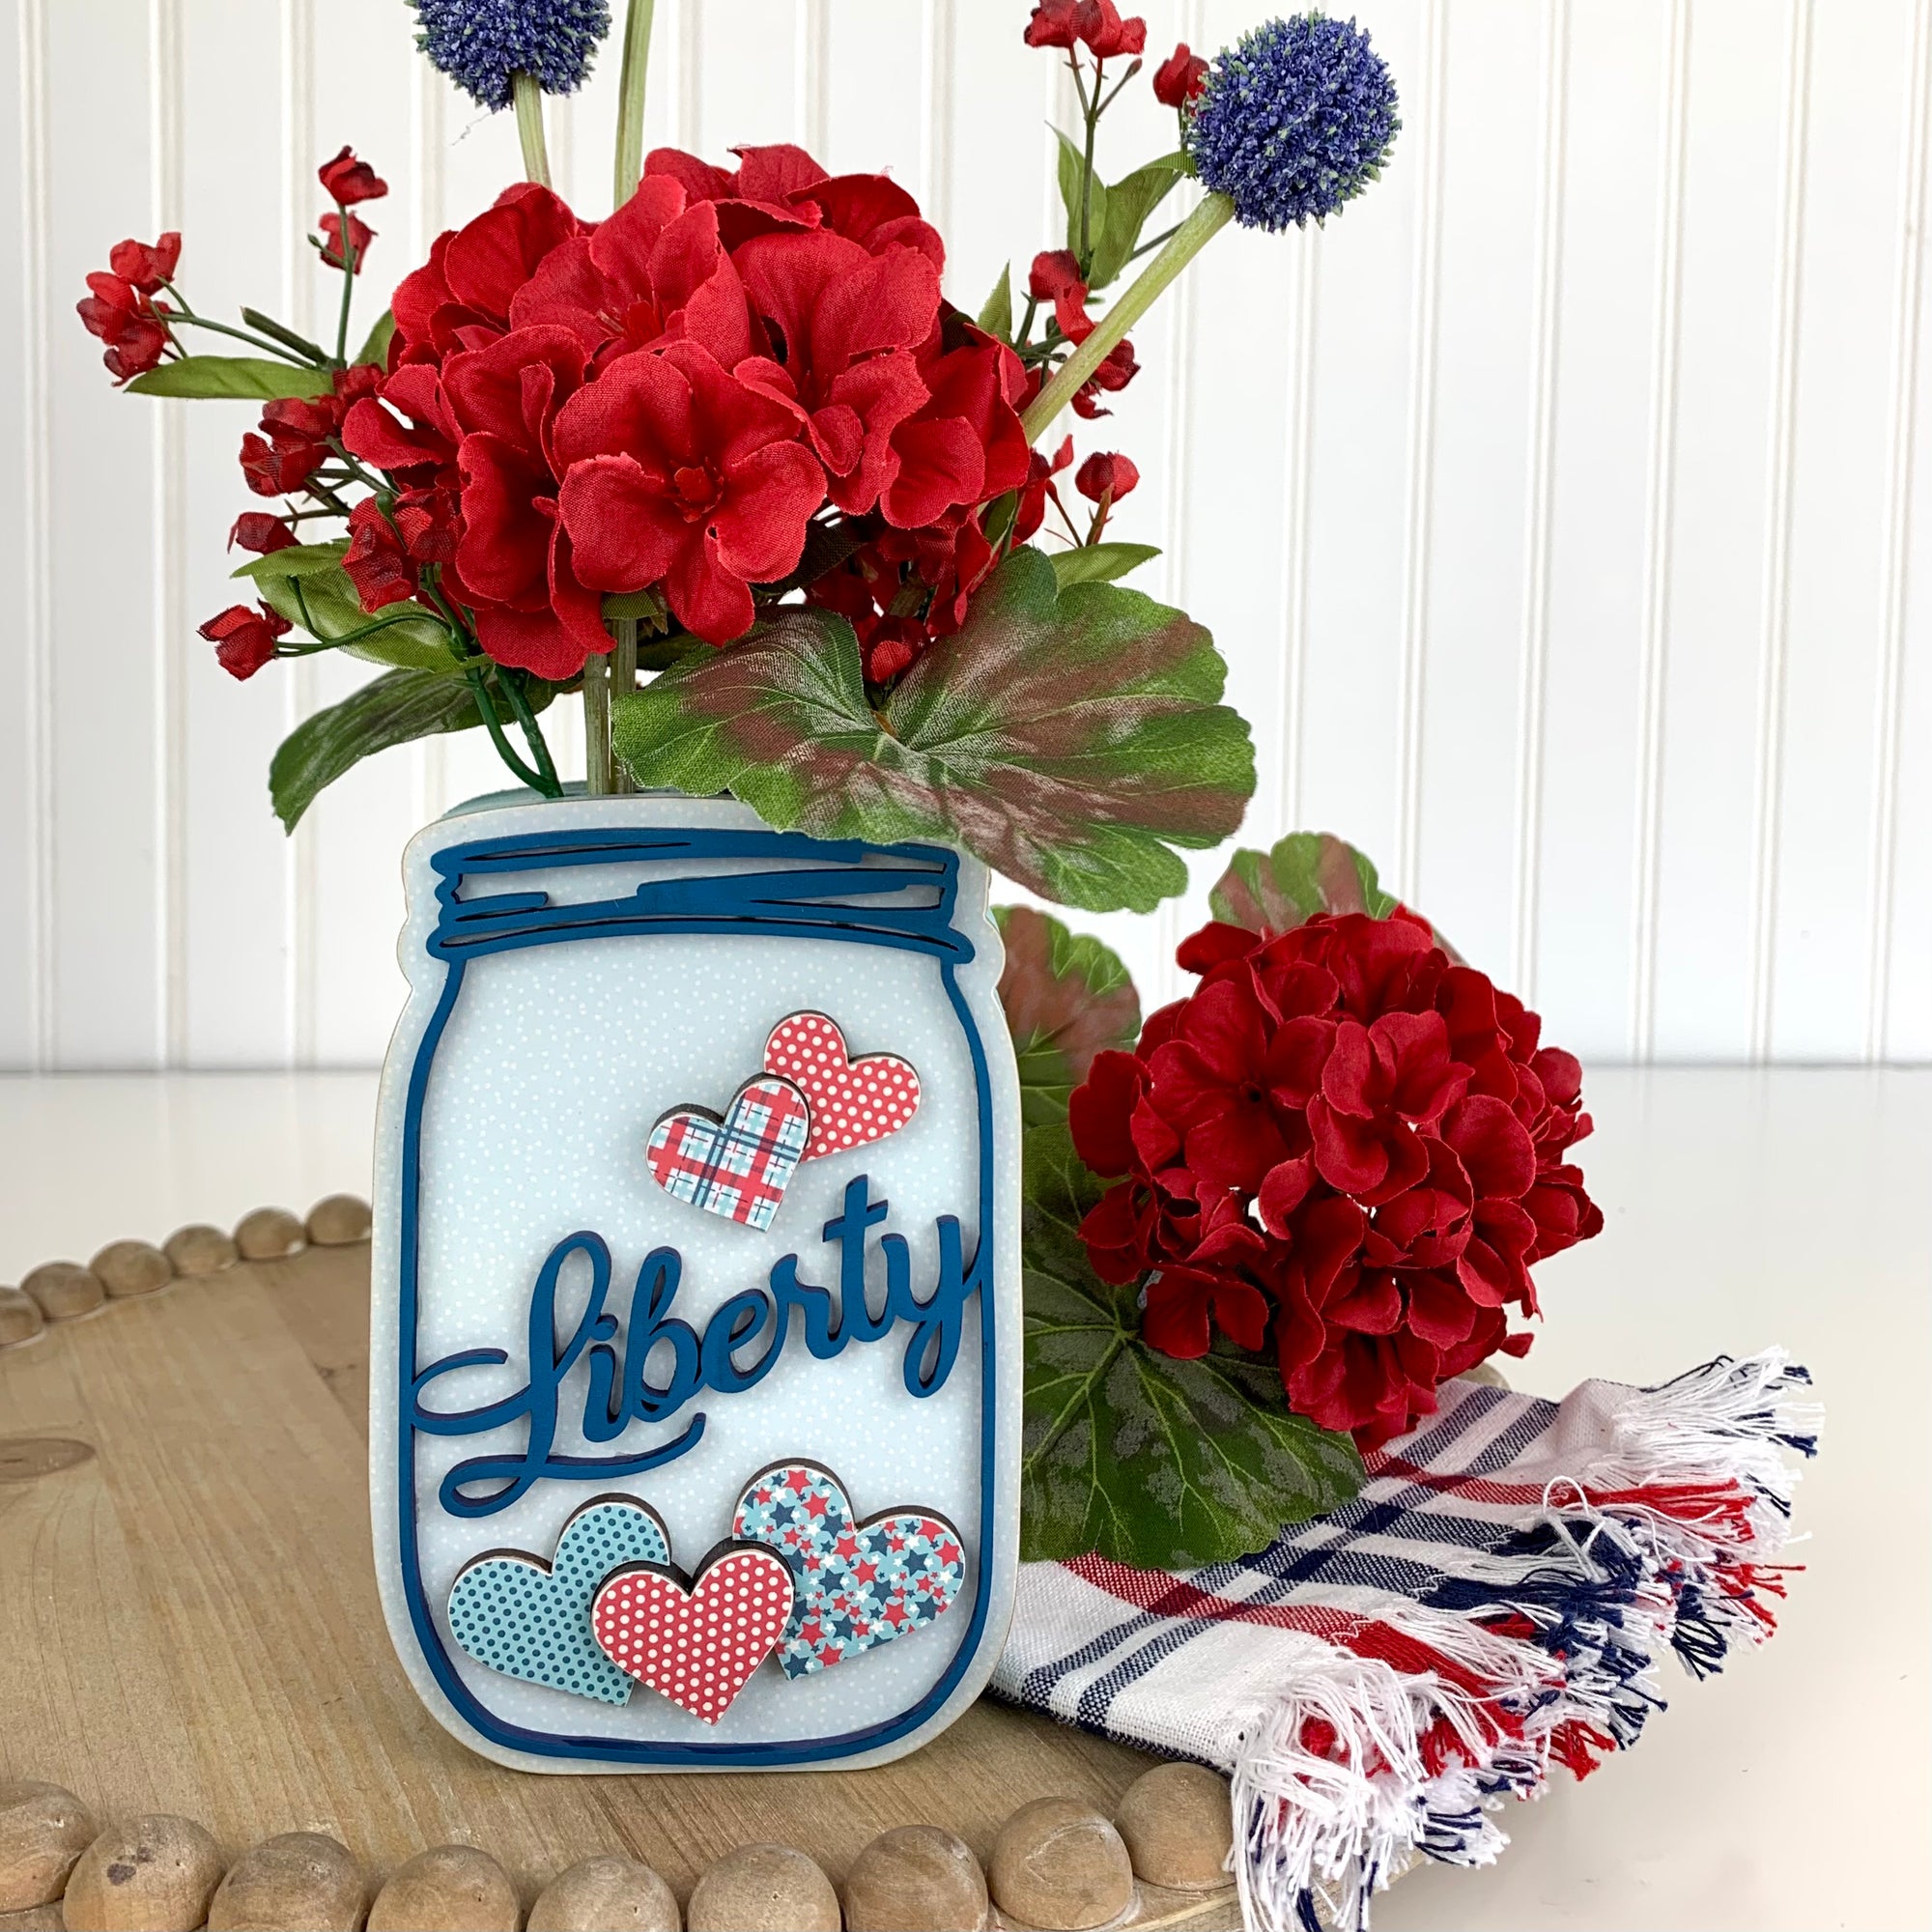 Wood mason jar decoration in red, white, and blue colors with the word liberty on it for 4th of July decorating.  Has a slot in the top to place flowers.